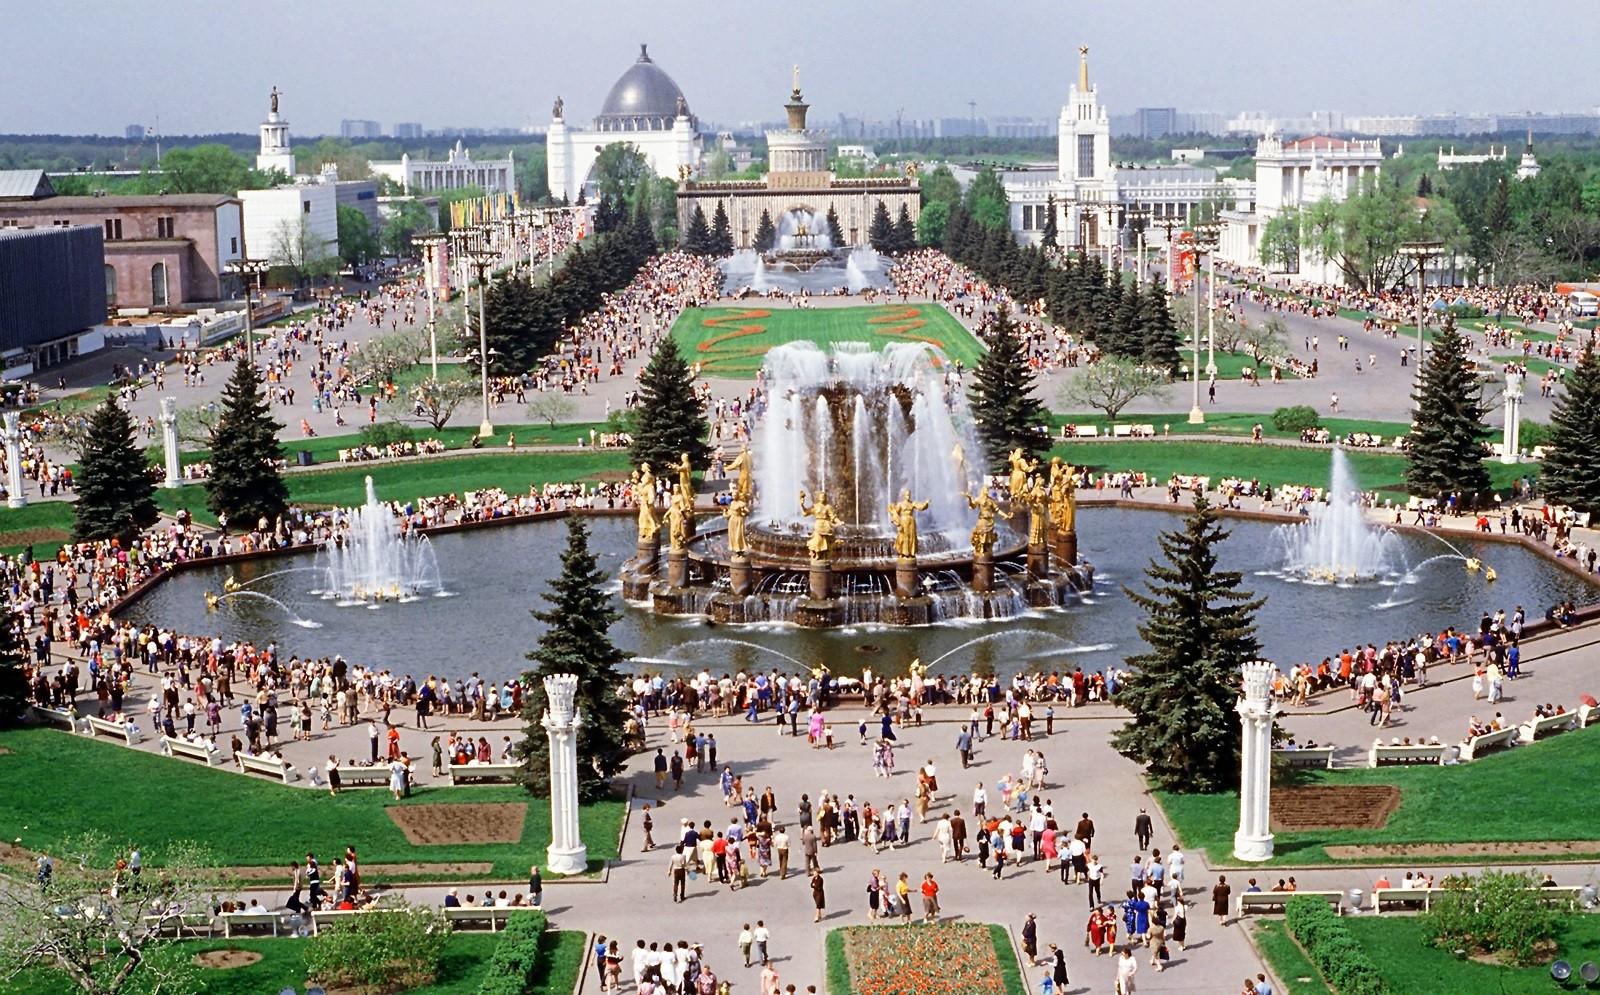 Cover image of this place VDNKH